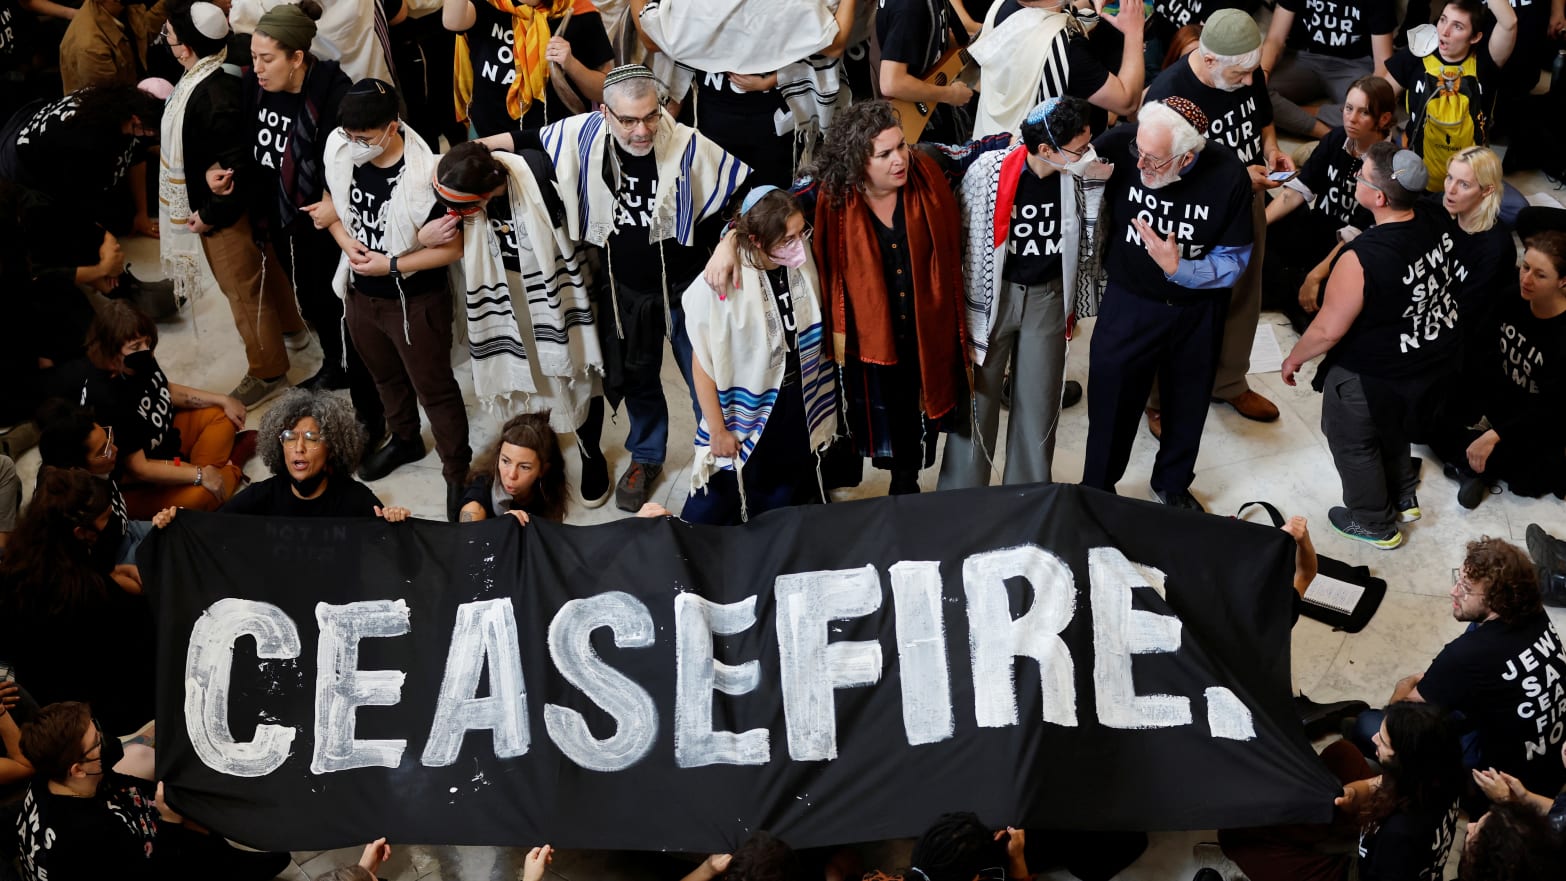 A photo of protesters calling for a cease fire in Gaza and an end to the Israel-Hamas conflict as they occupied the rotunda of the Cannon House office building with a banner reading: “CEASEFIRE.”